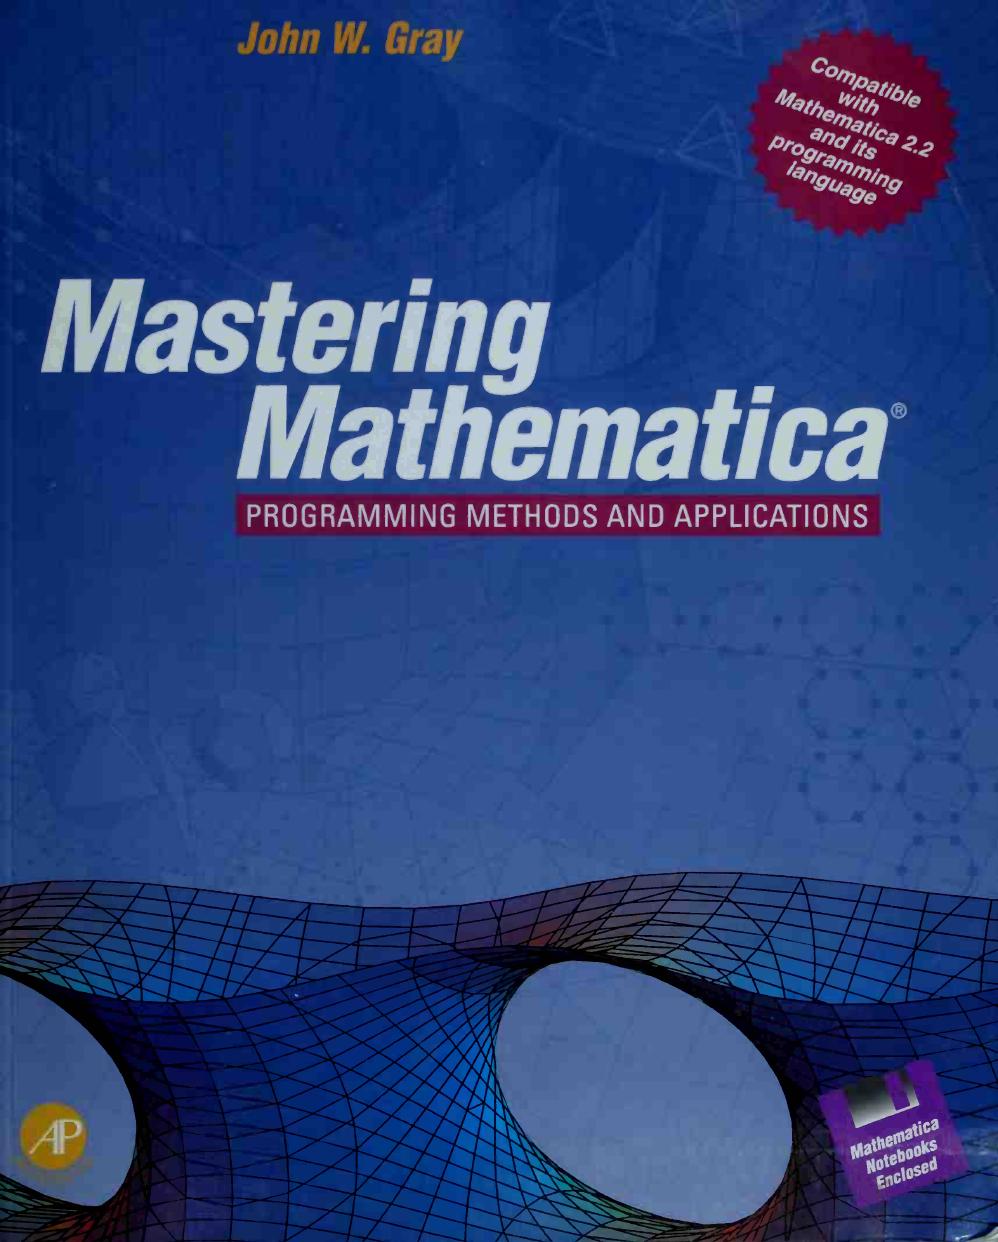 Mastering Mathematica®: Programming Methods and Applications